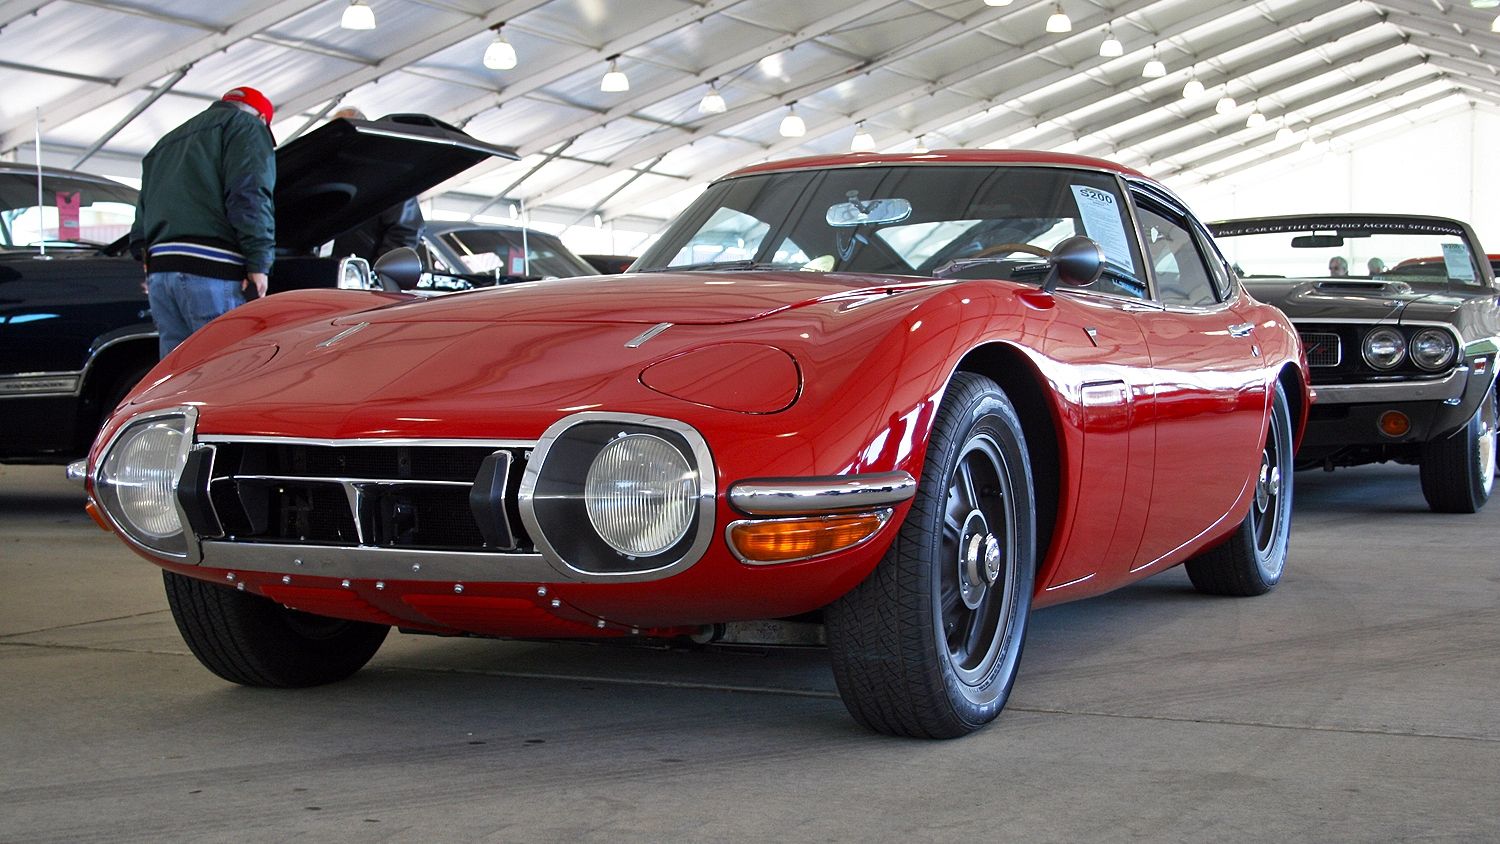 1967 Import Values On the Rise: 1967 Toyota 2000GT Misses $800k Reserve at Mecum Auction 